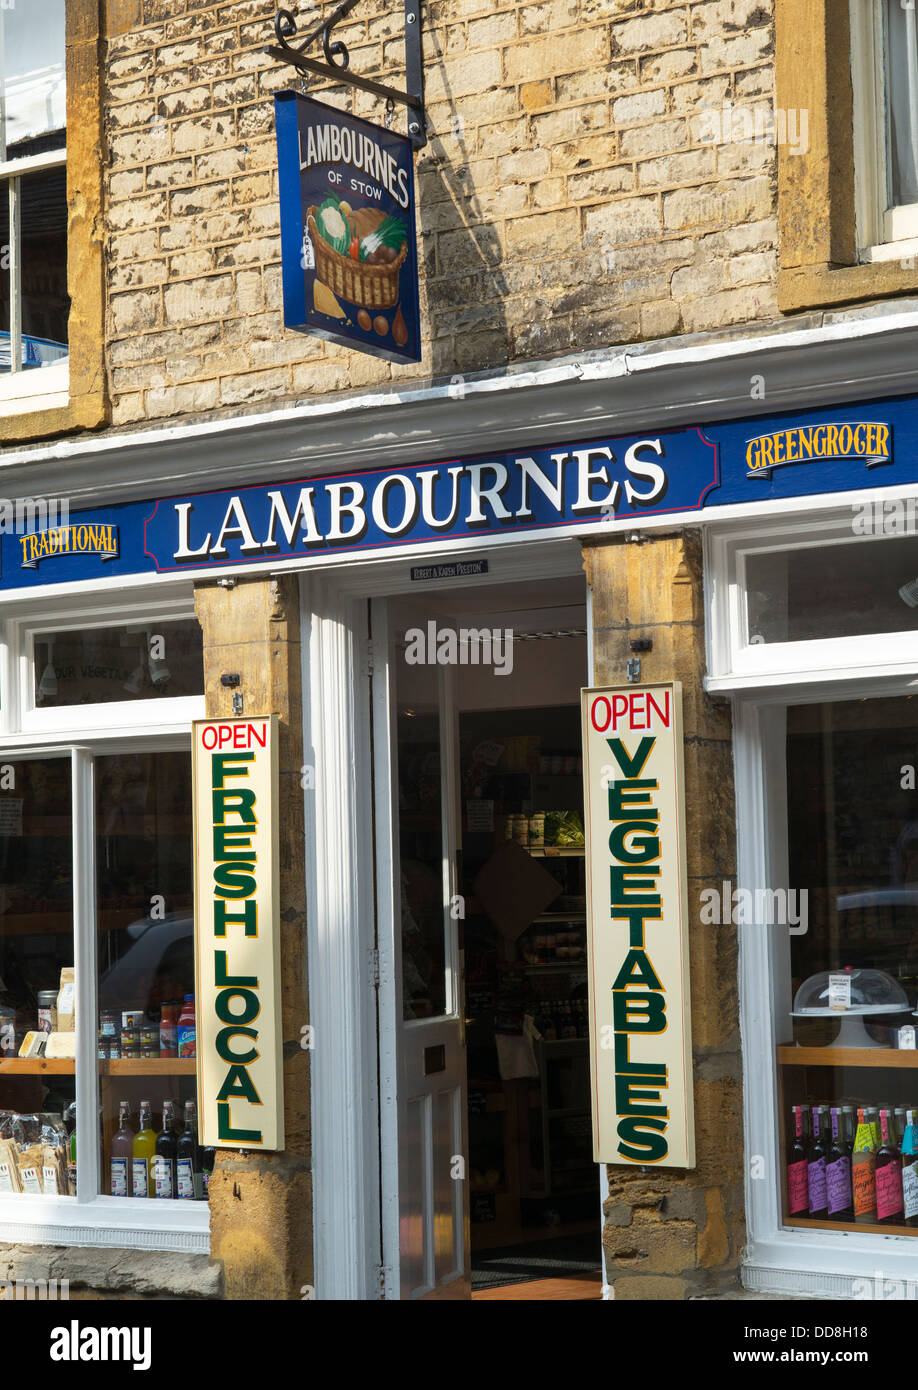 Lambournes family Greengrocers shop, Stow on the Wold, Cotswolds, Gloucestershire, England Stock Photo